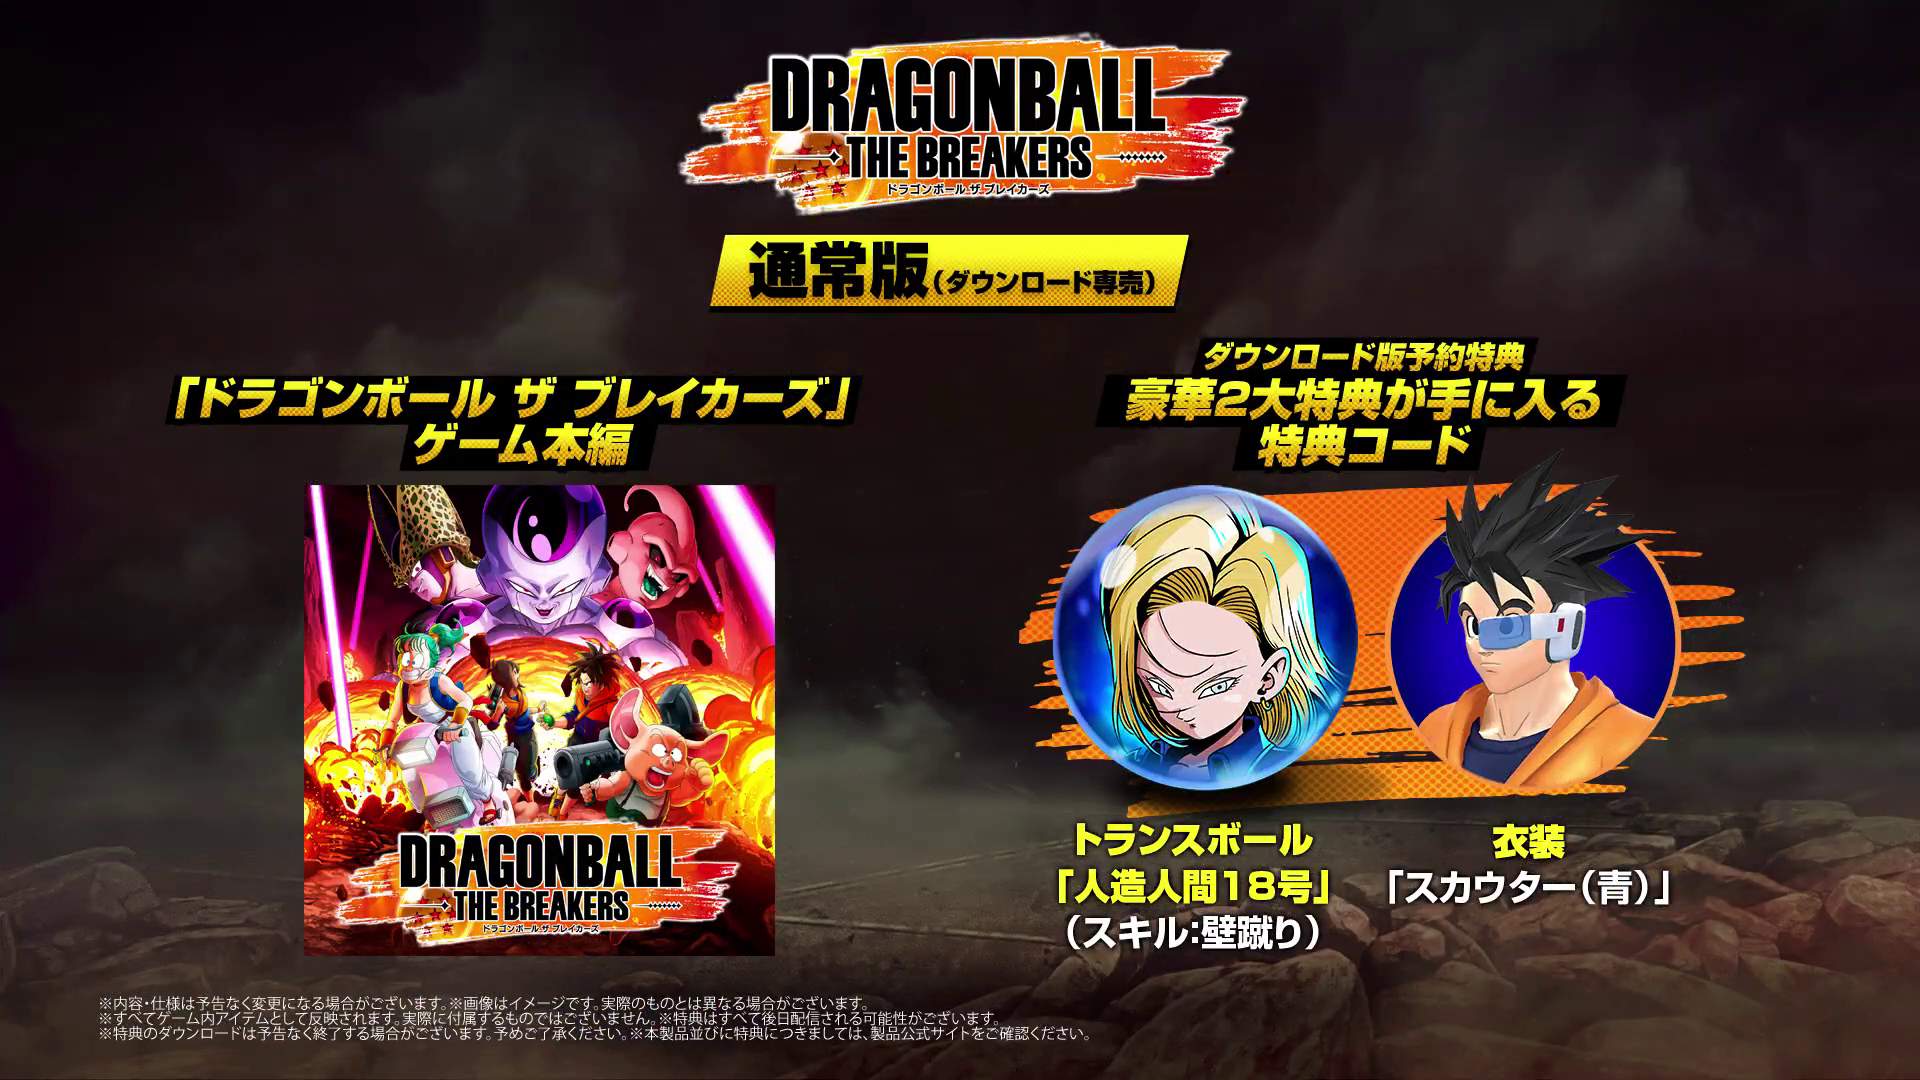 Dragon Ball The Breakers an asymmetrical multiplayer game coming 2022